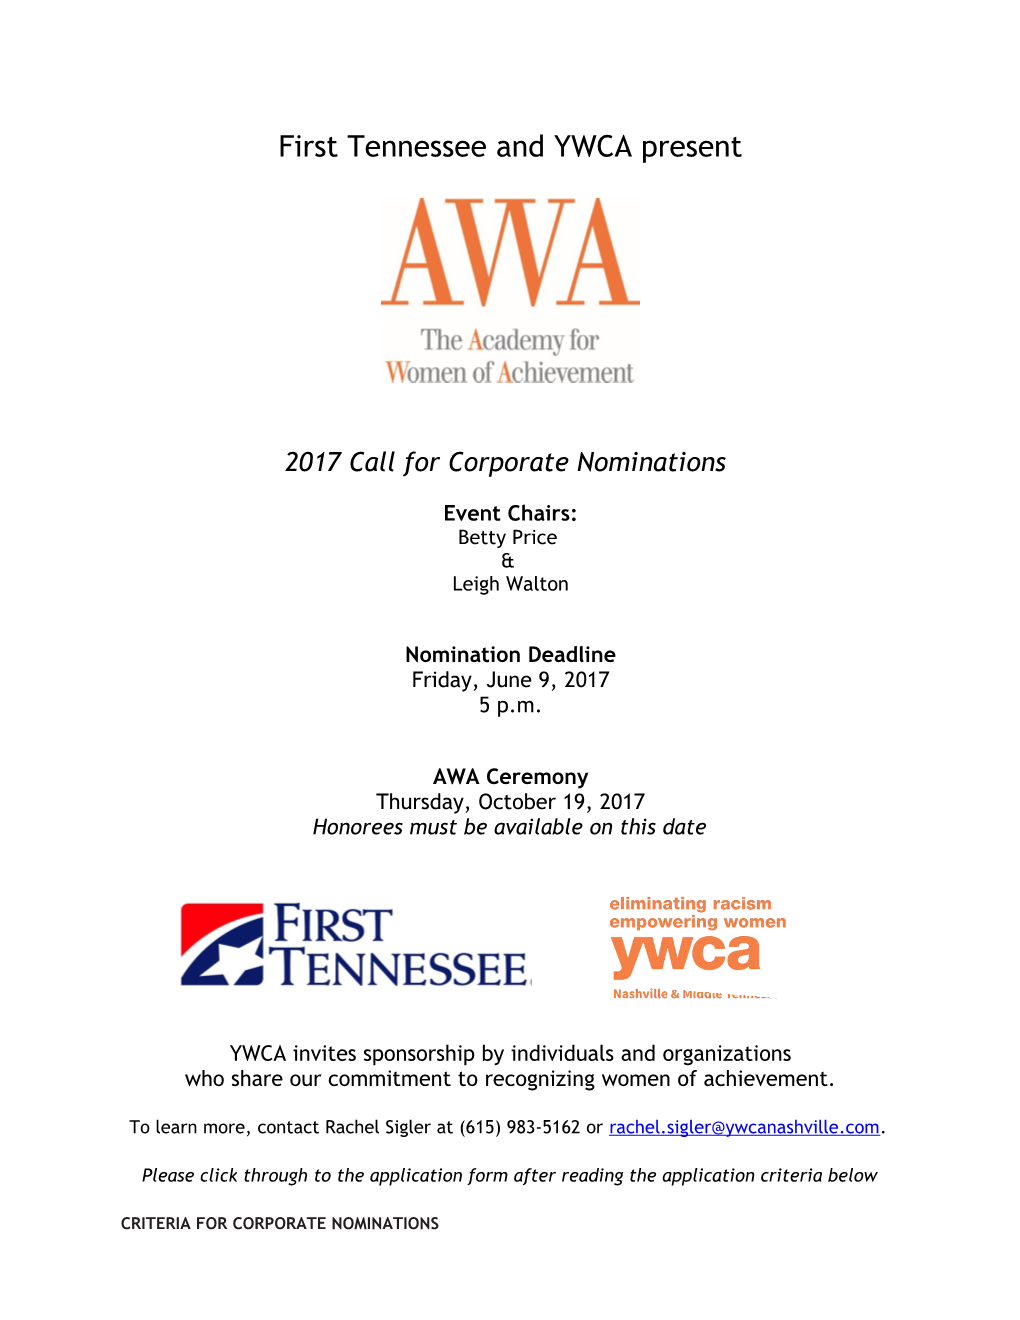 First Tennessee and YWCA Present